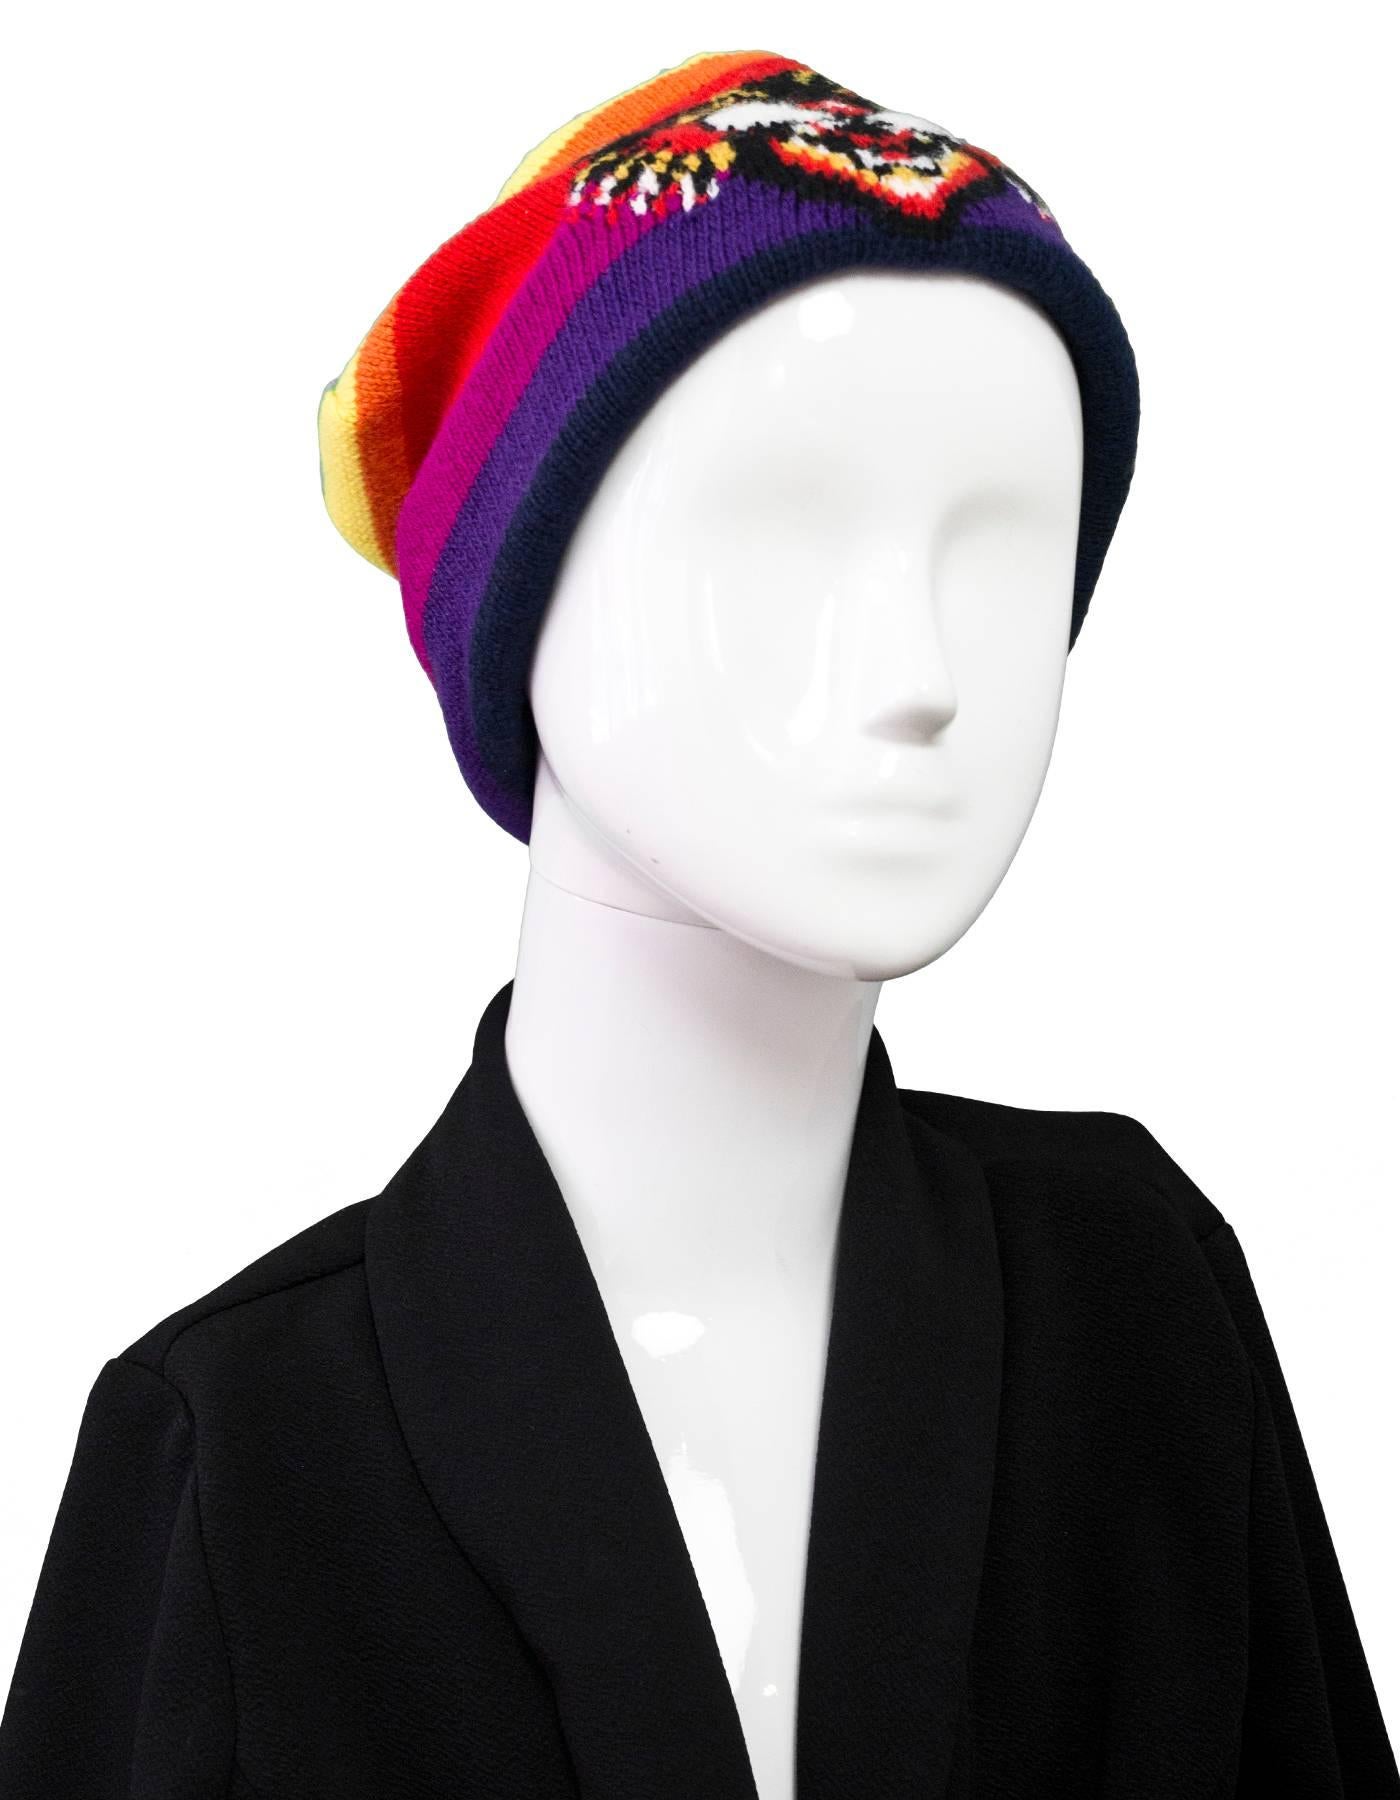 Gucci Rainbow Tiger Beanie NWT

Made In: Italy
Color: Multi-color
Materials: 100% Wool
Retail Price: $680 + tax
Overall Condition: Excellent pre-owned condition -NWT

Measurements:
Length: 12"